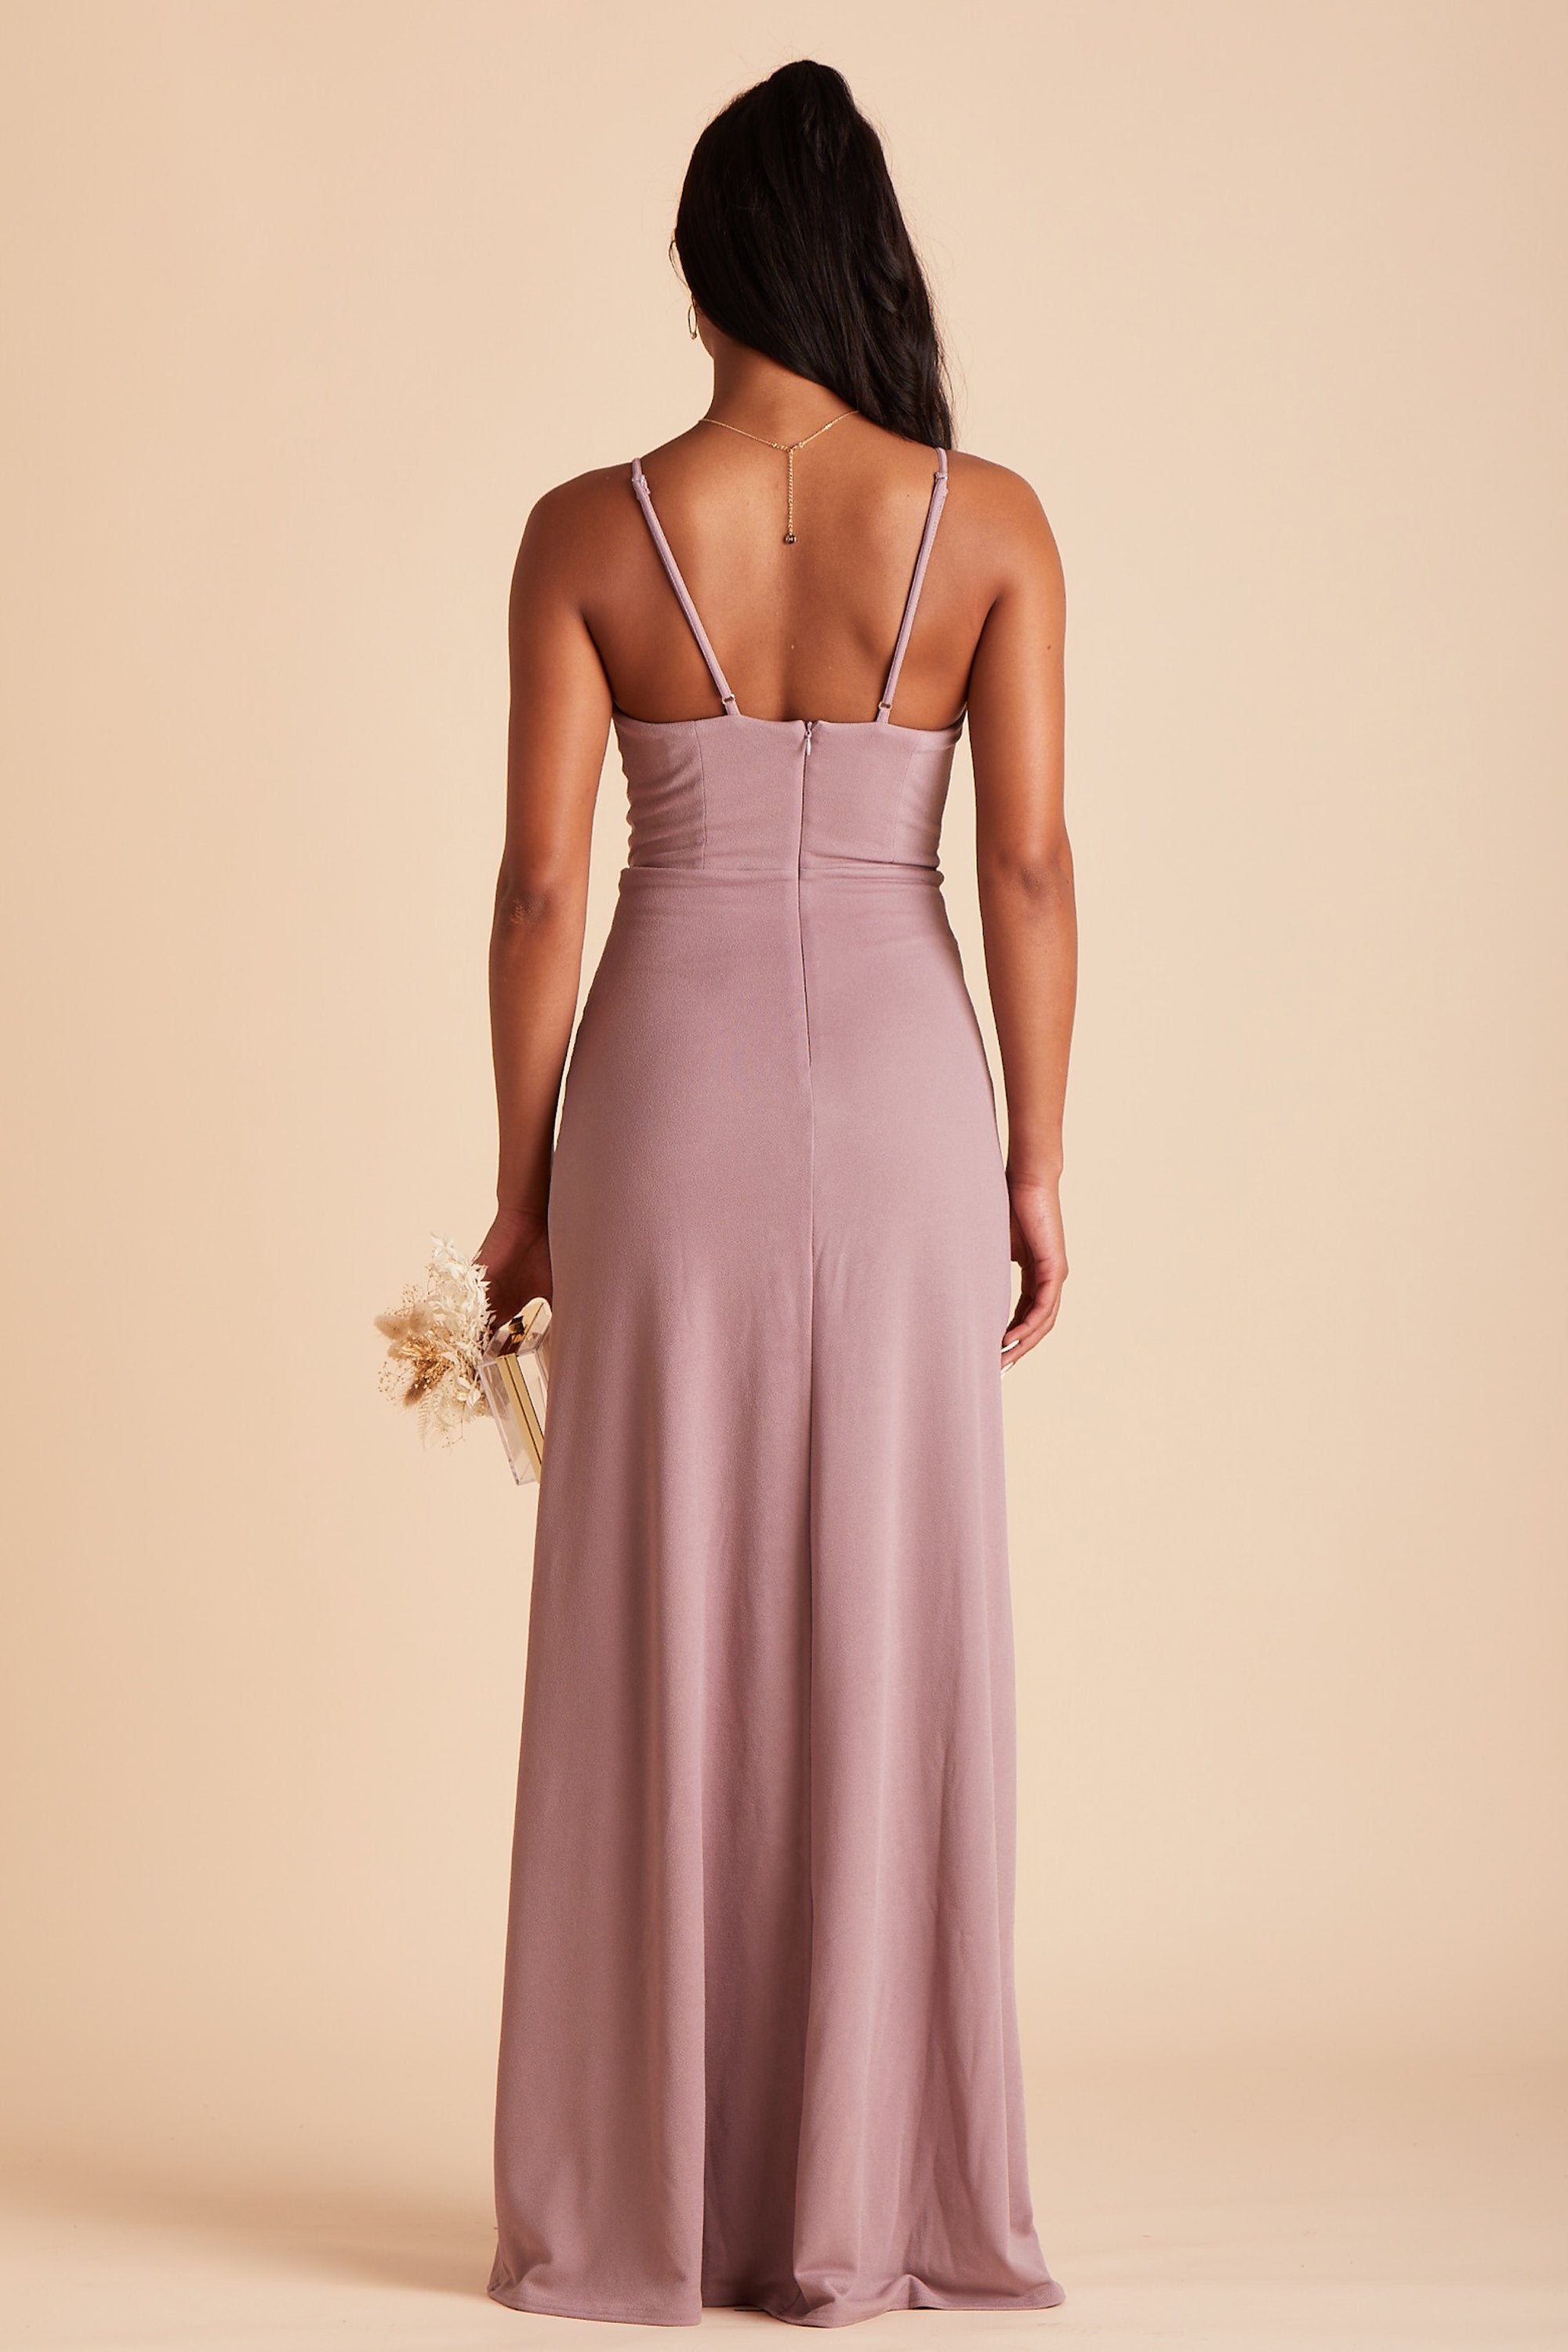 Ash bridesmaid dress in dark mauve crepe by Birdy Grey, back view